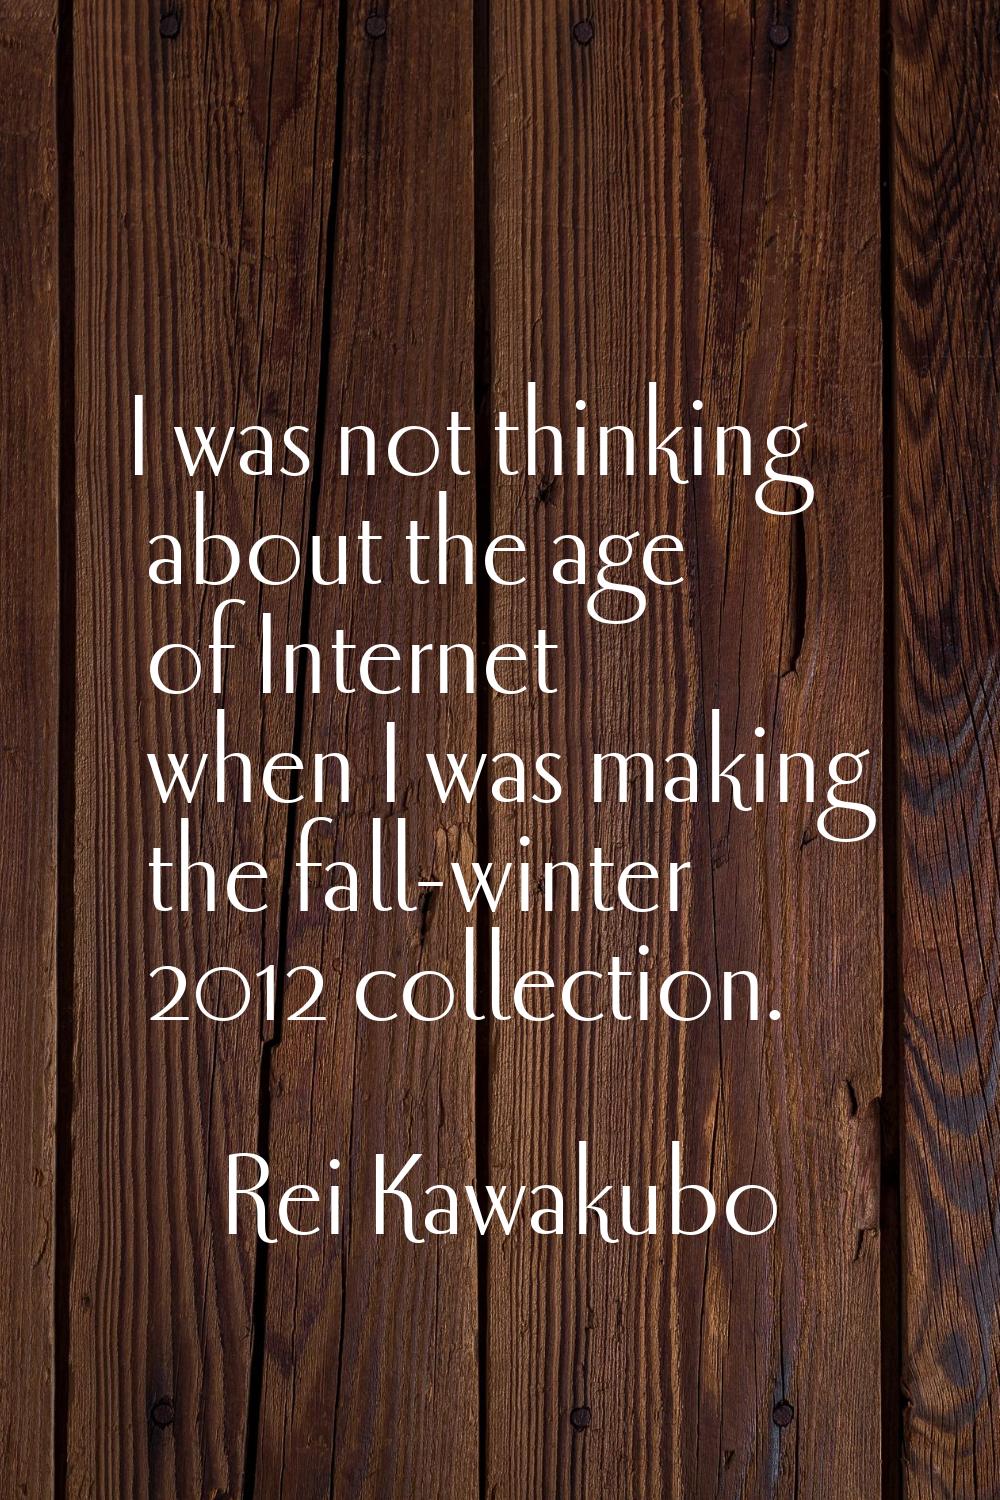 I was not thinking about the age of Internet when I was making the fall-winter 2012 collection.